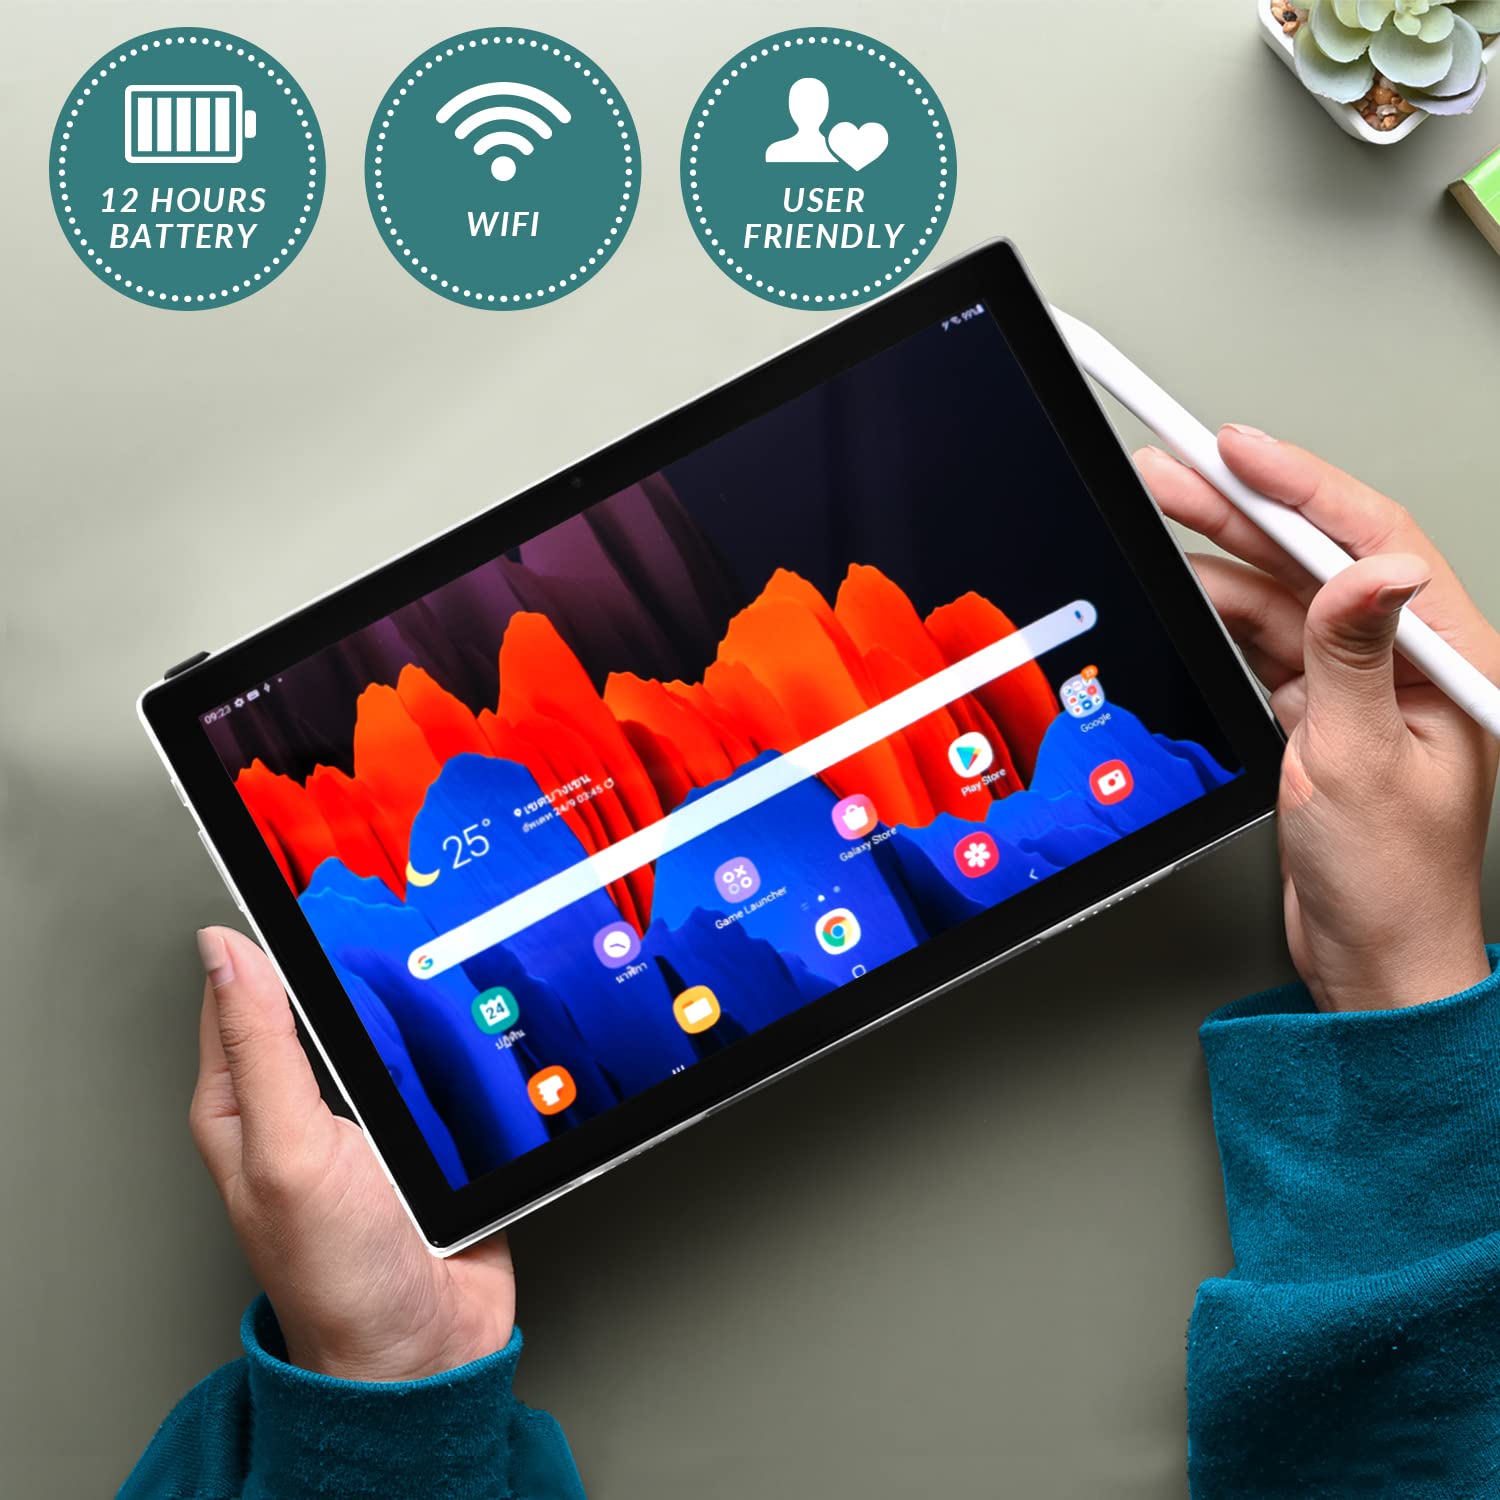 10.1 Inch Android Tablet -2 in 1 Tablet 1080p HD Display, 5000 mAH, Dual Camera, WiFi Compatibility, Quad-Core Processor, 2GB RAM, 32GB Storage, Magnetic Keyboard, Stylus Pen & Case Included- Silver